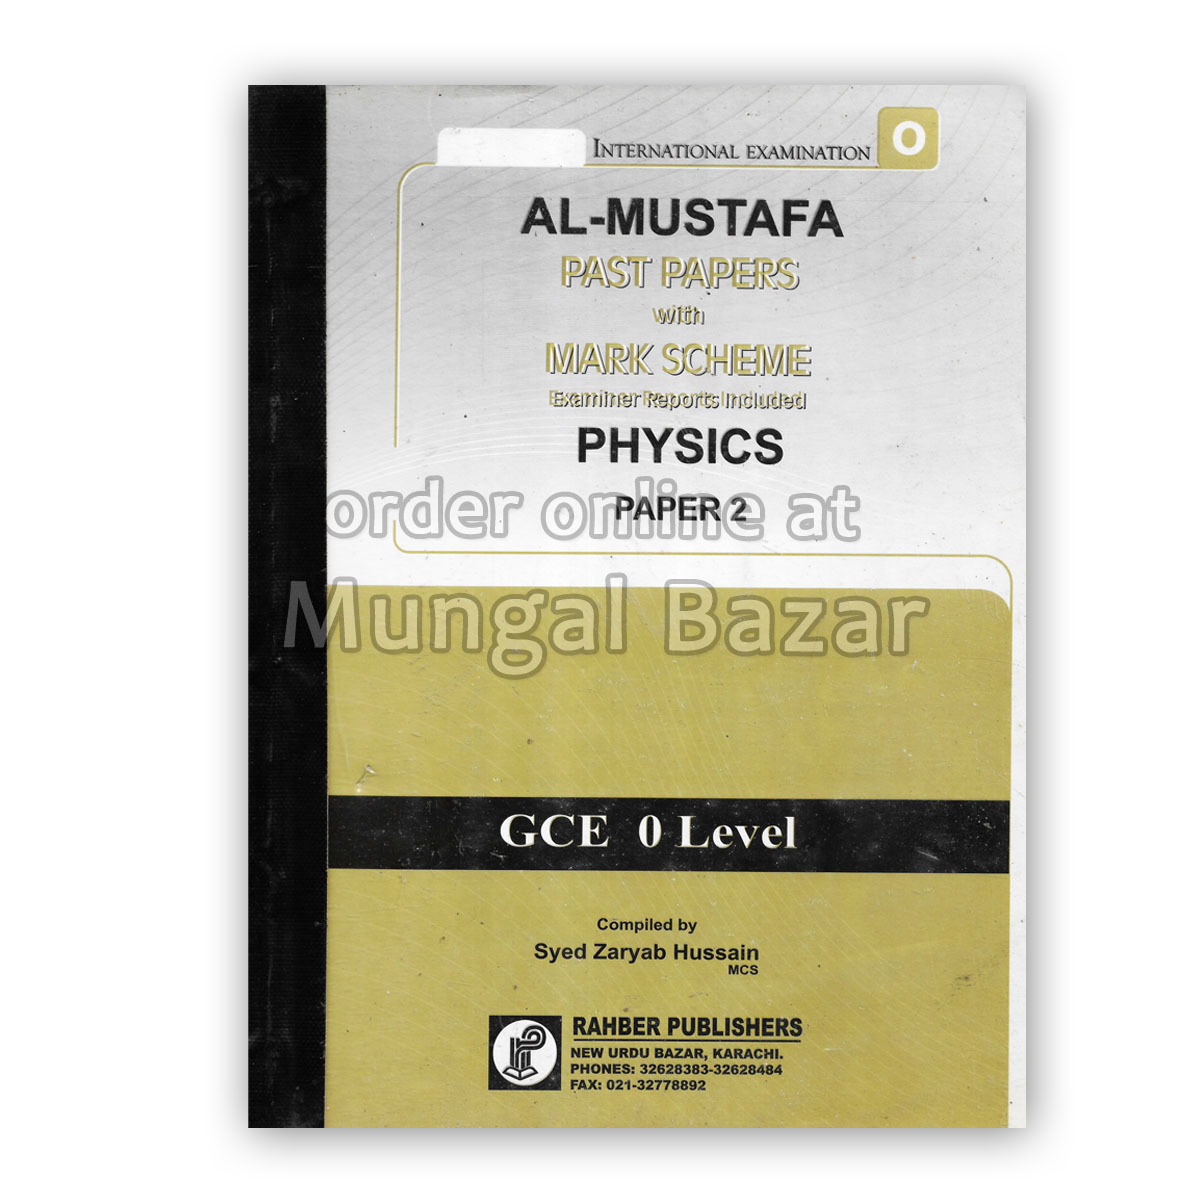 GCE O-LEVEL AL-MUSTAFA PAST PAPERS WITH MARK SCHEME PHYSICS PAPER 2 ...